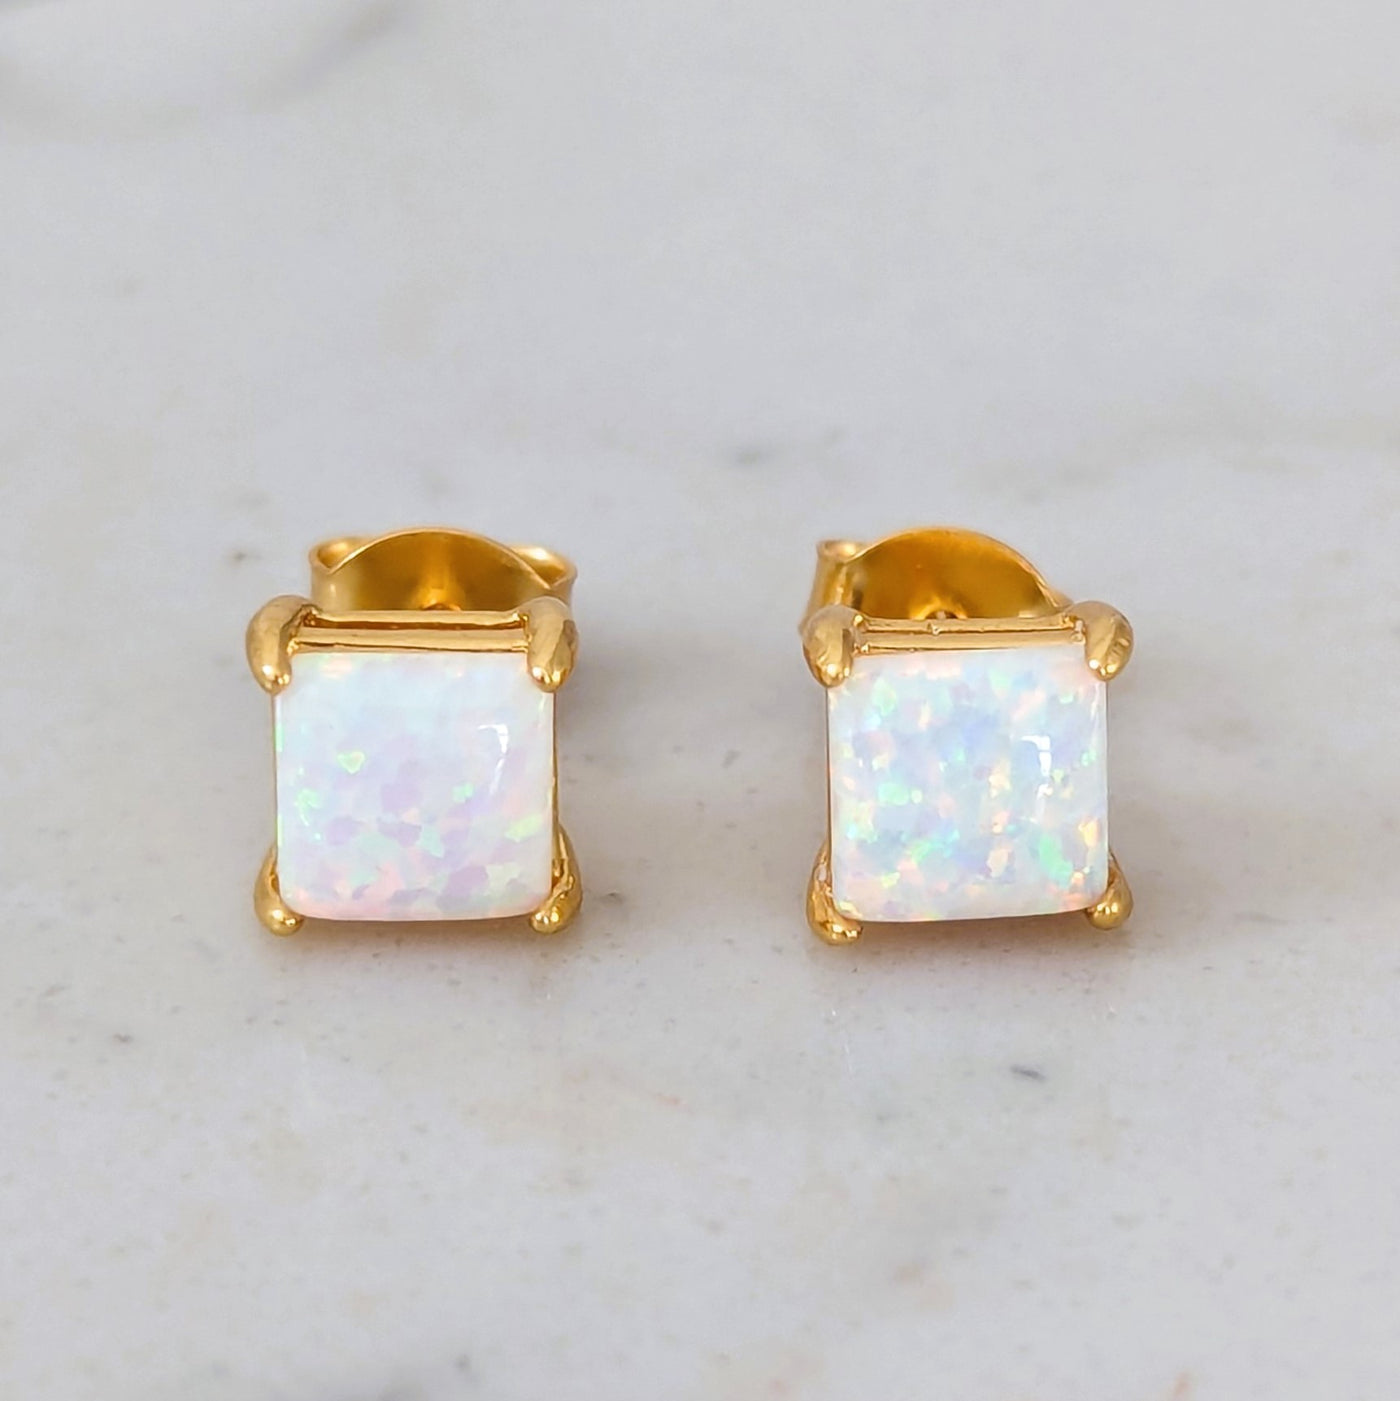 18 carat gold plated opal square cushion stud earrings